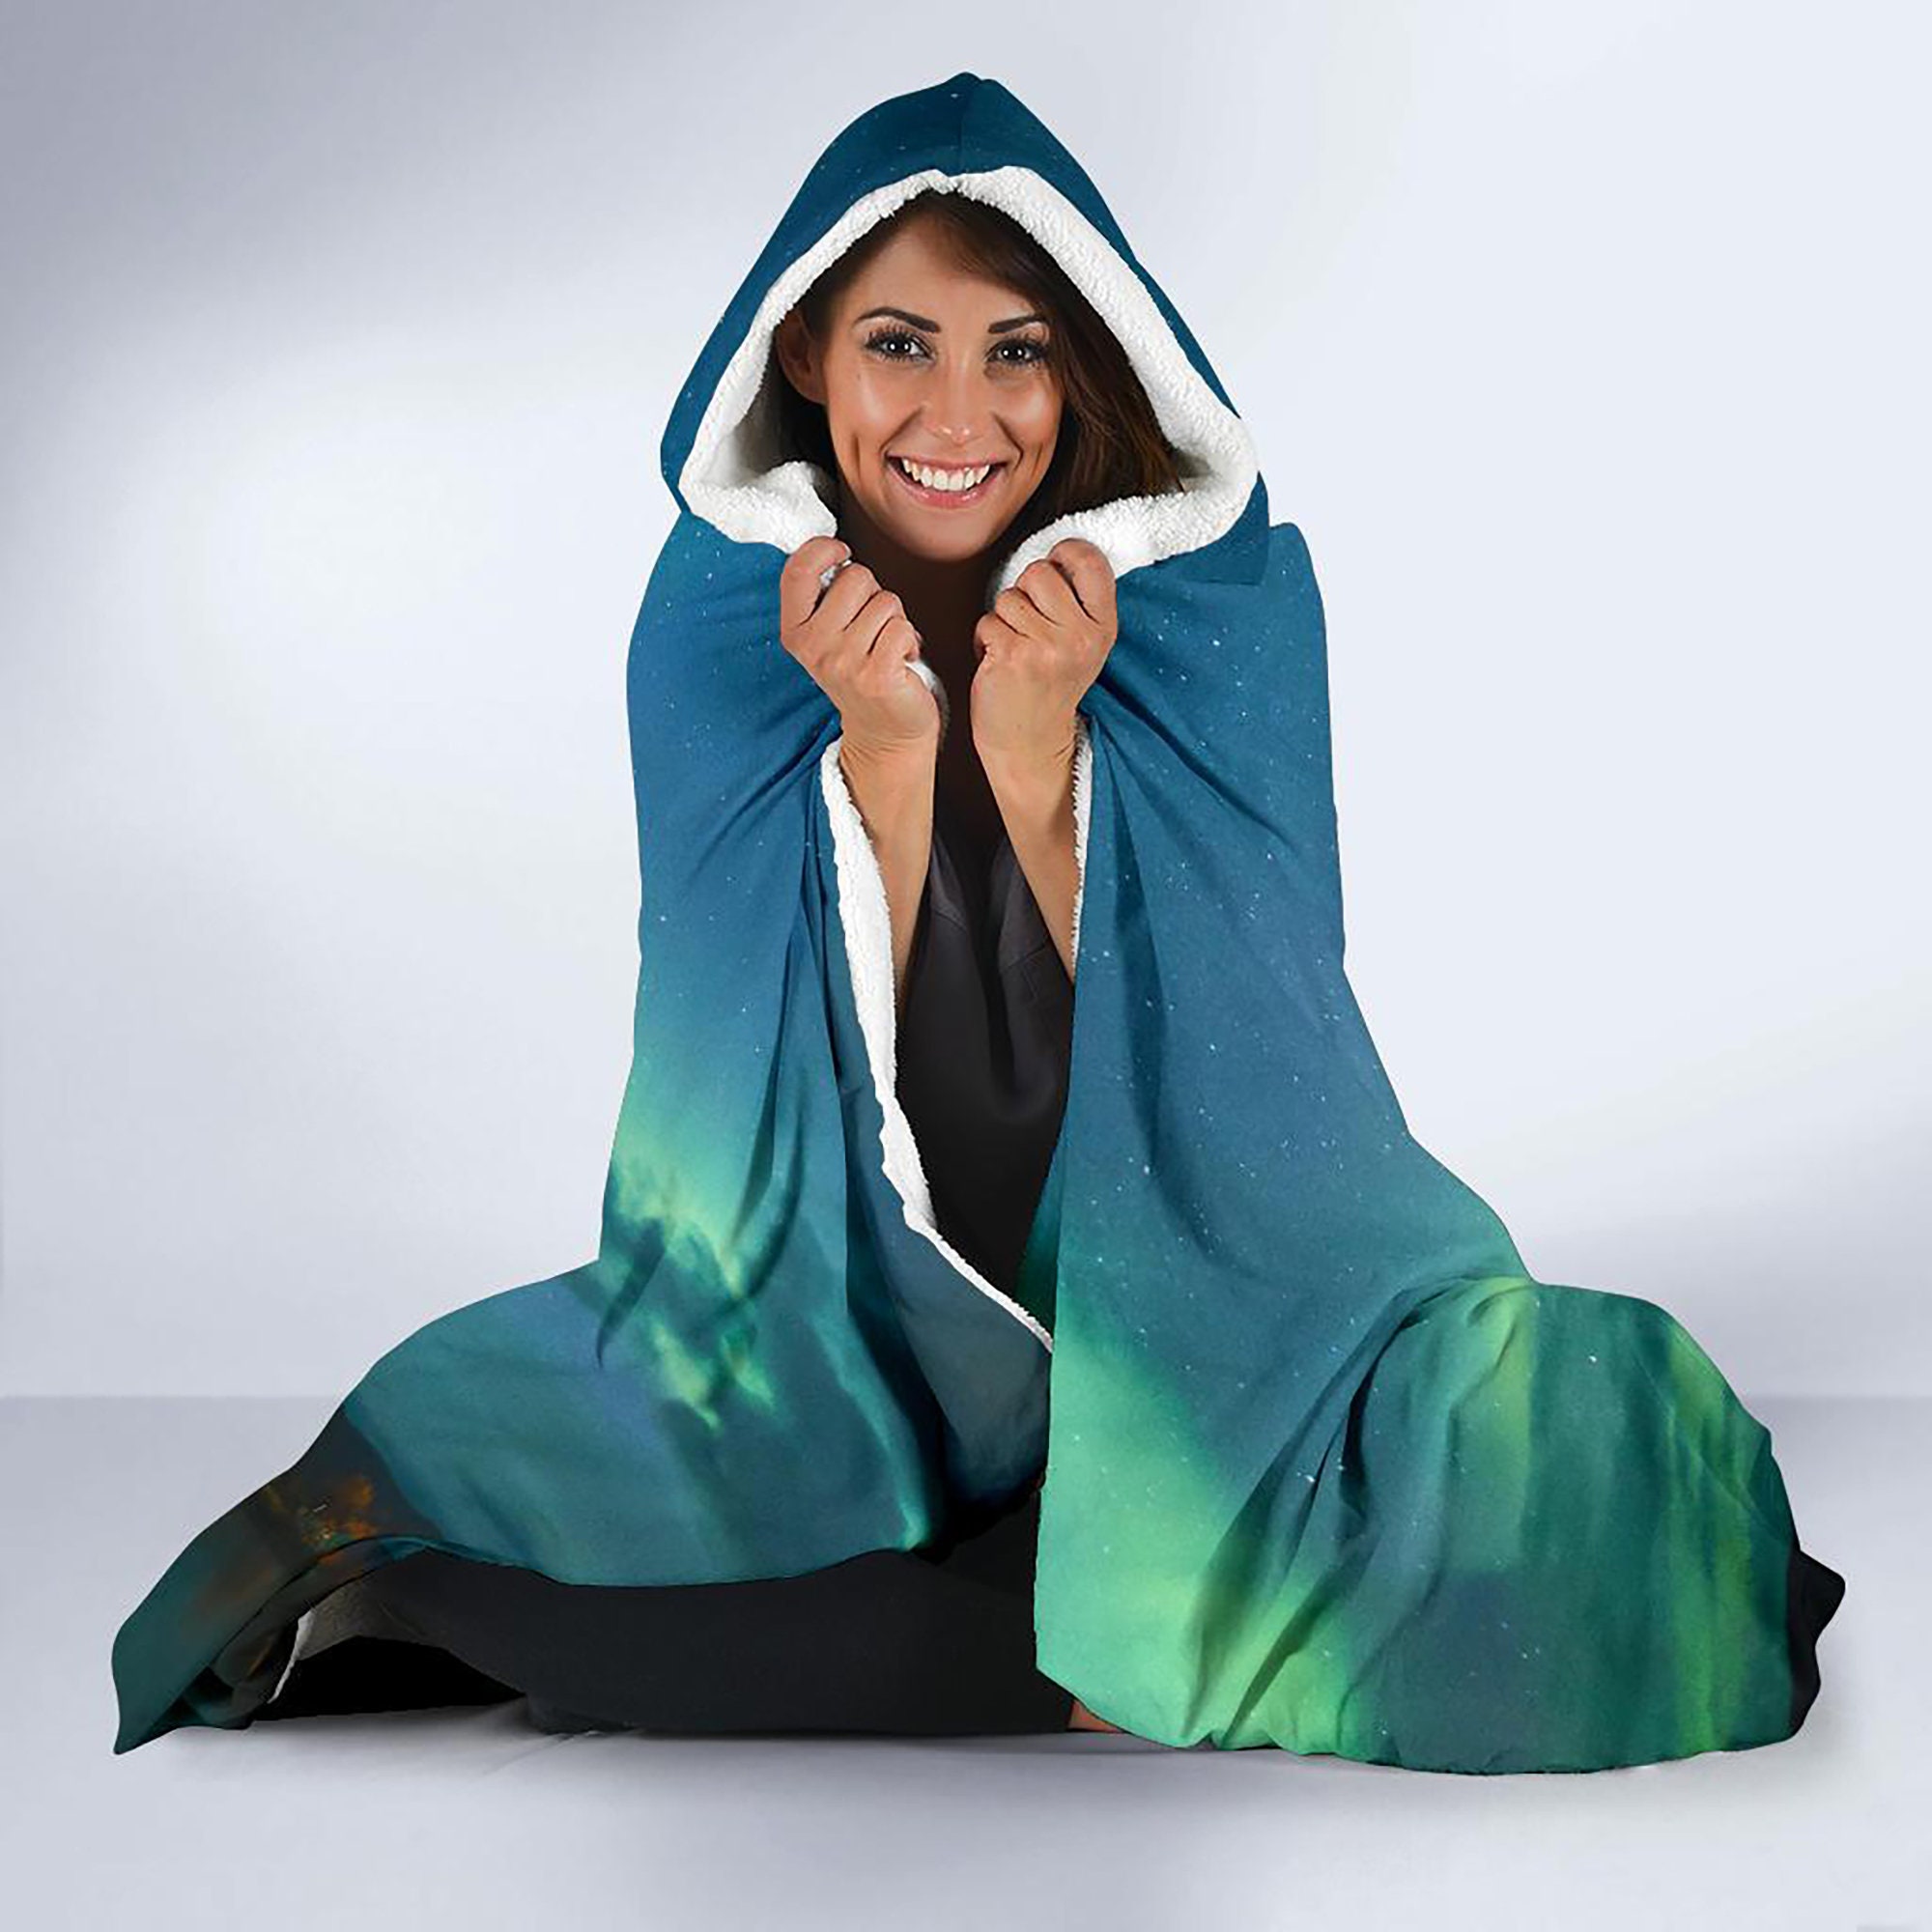 Dancing Night Sky Hooded Blanket, Adult and Youth Sizes, Soft Fleece Blanket with a Hood, Northern Lights Throw, Cozy Aurora Borealis